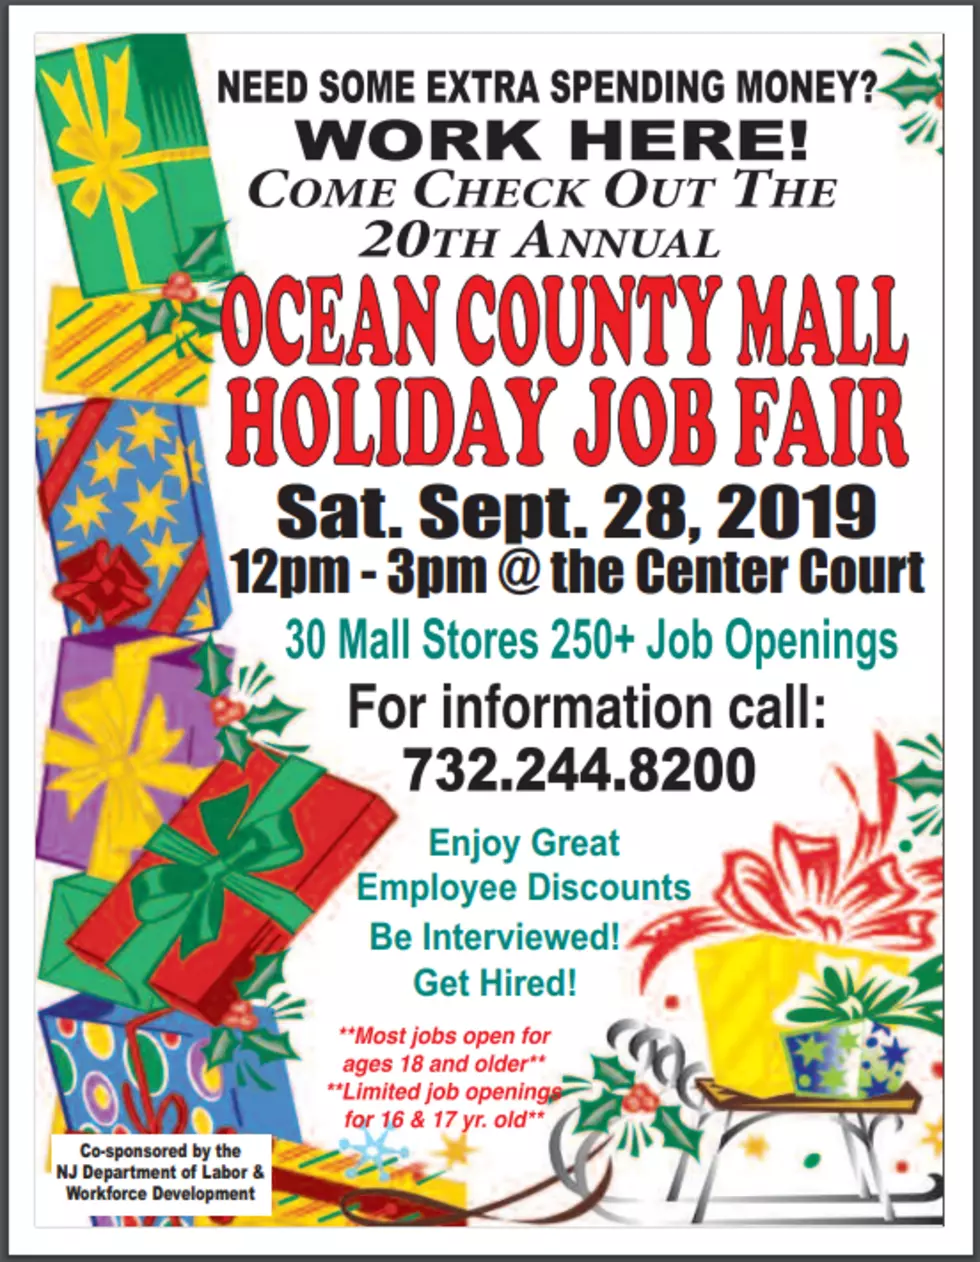 Ocean County Mall Hosting Holiday Job Fair This Weekend [2019]